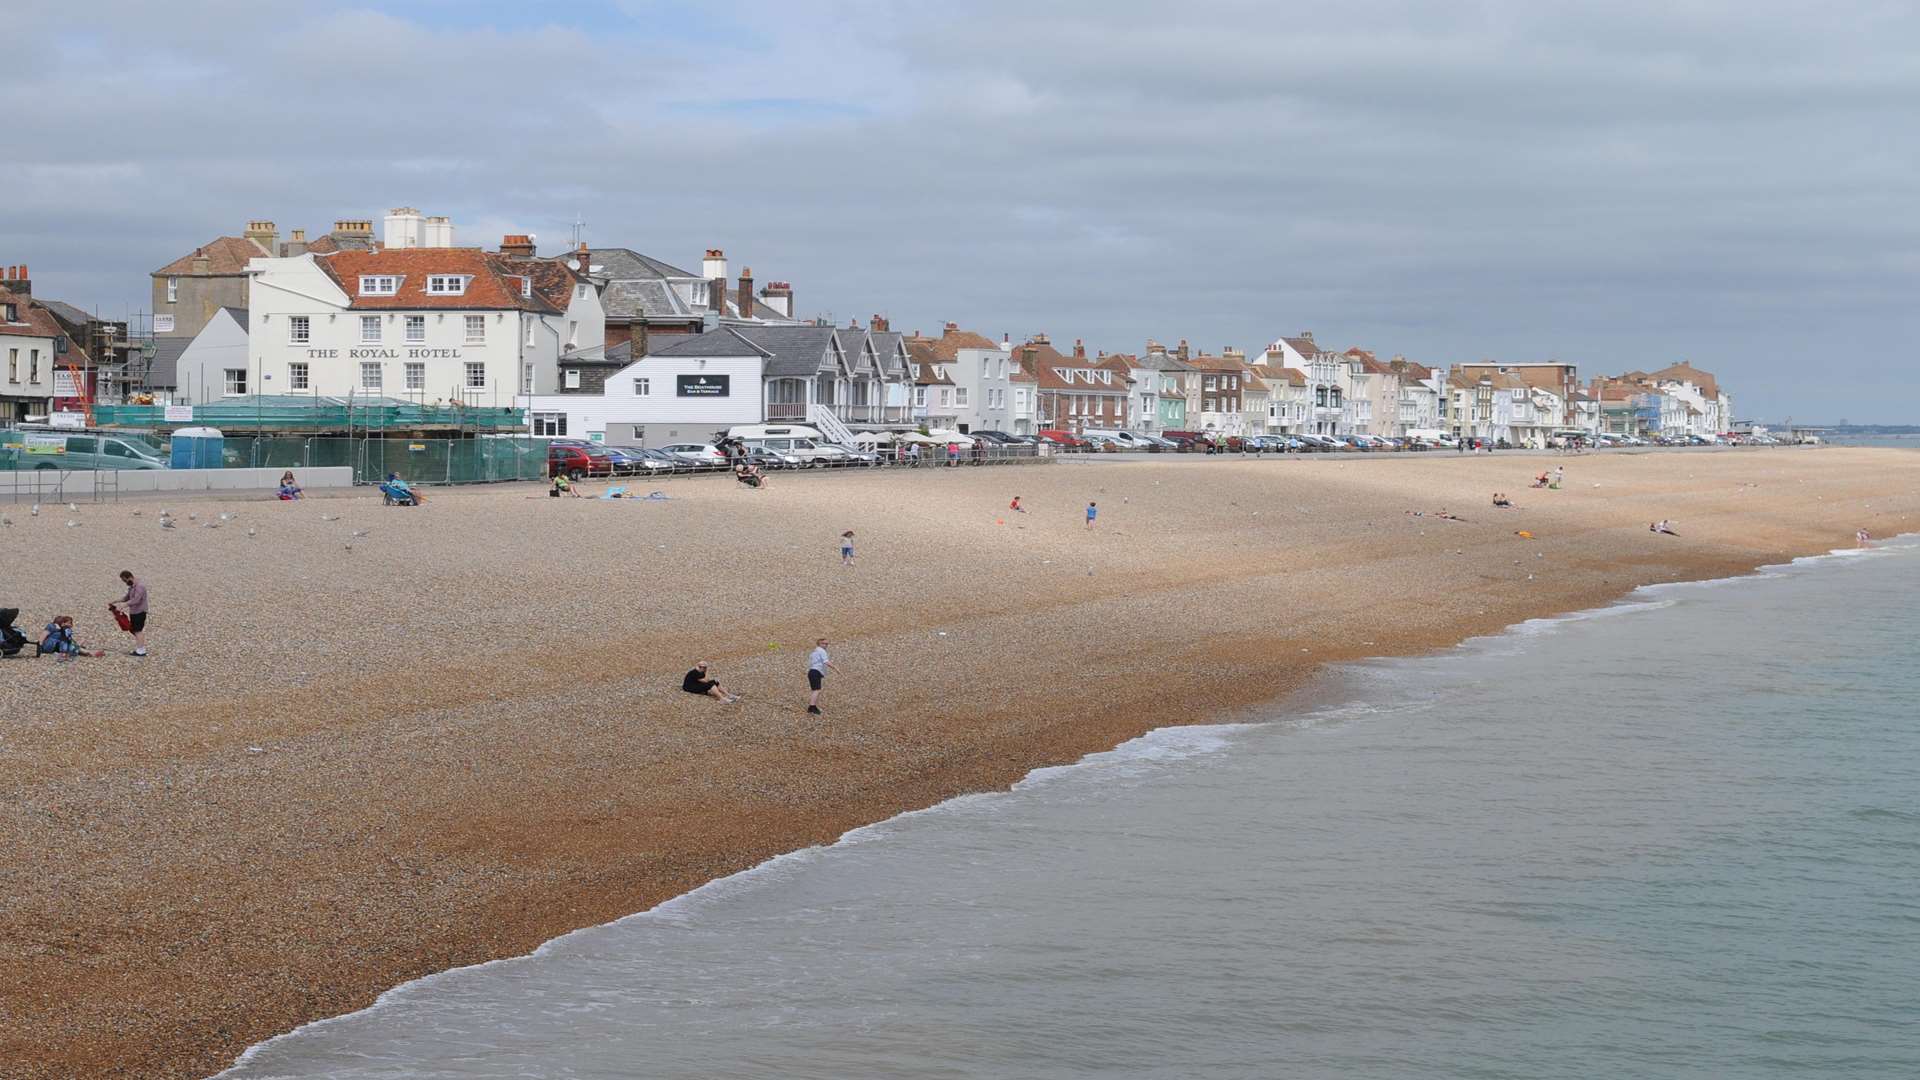 A view of Deal from The Pier